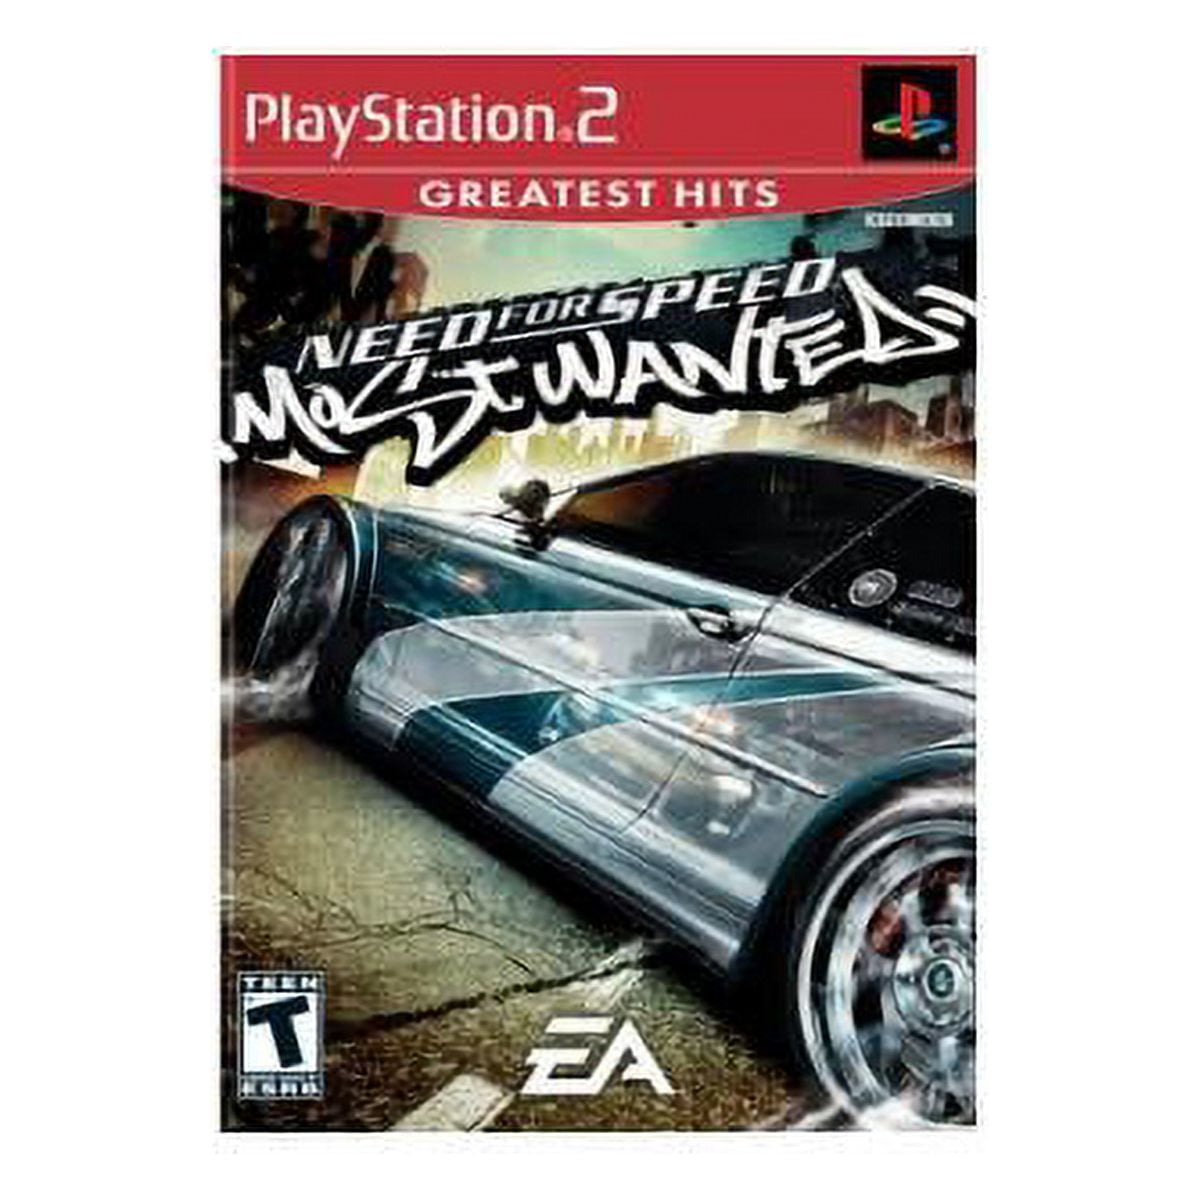 Need for Speed: Most Wanted (Greatest Hits), Electronic Arts, PlayStation 2